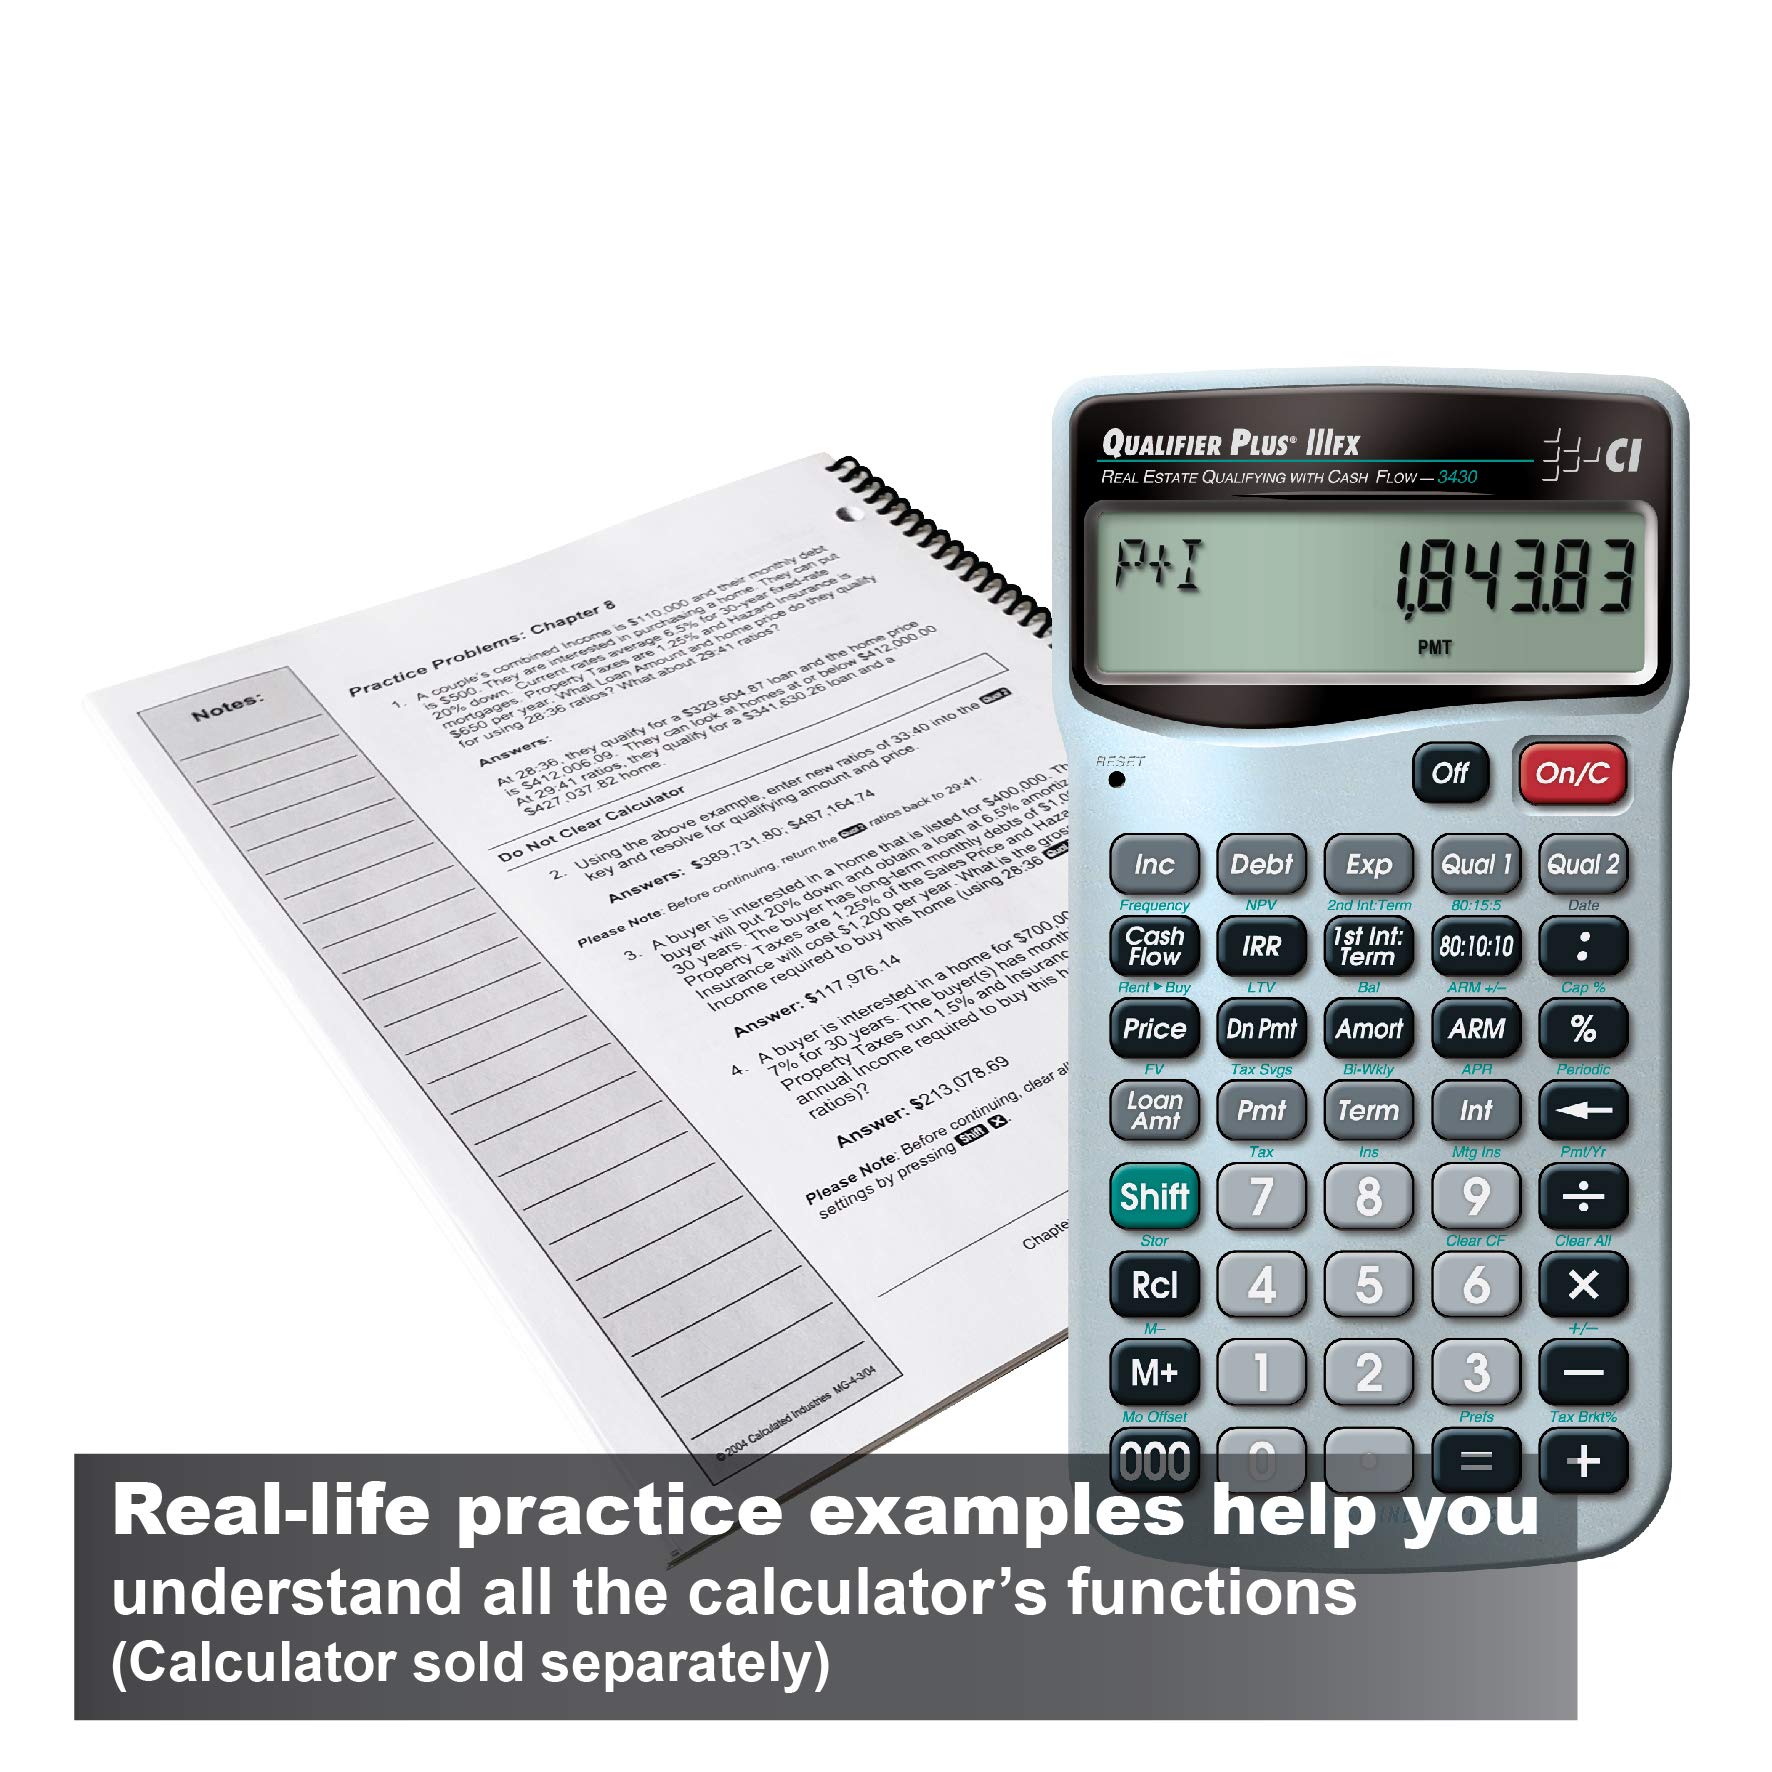 Calculated Industries 2128 Qualifier Plus Training Program Workbook for Qualifier Plus IIIx and IIIfx Real Estate Finance Calculators | 3 Modules: Basic, Comprehensive, Intro to Commercial Investment